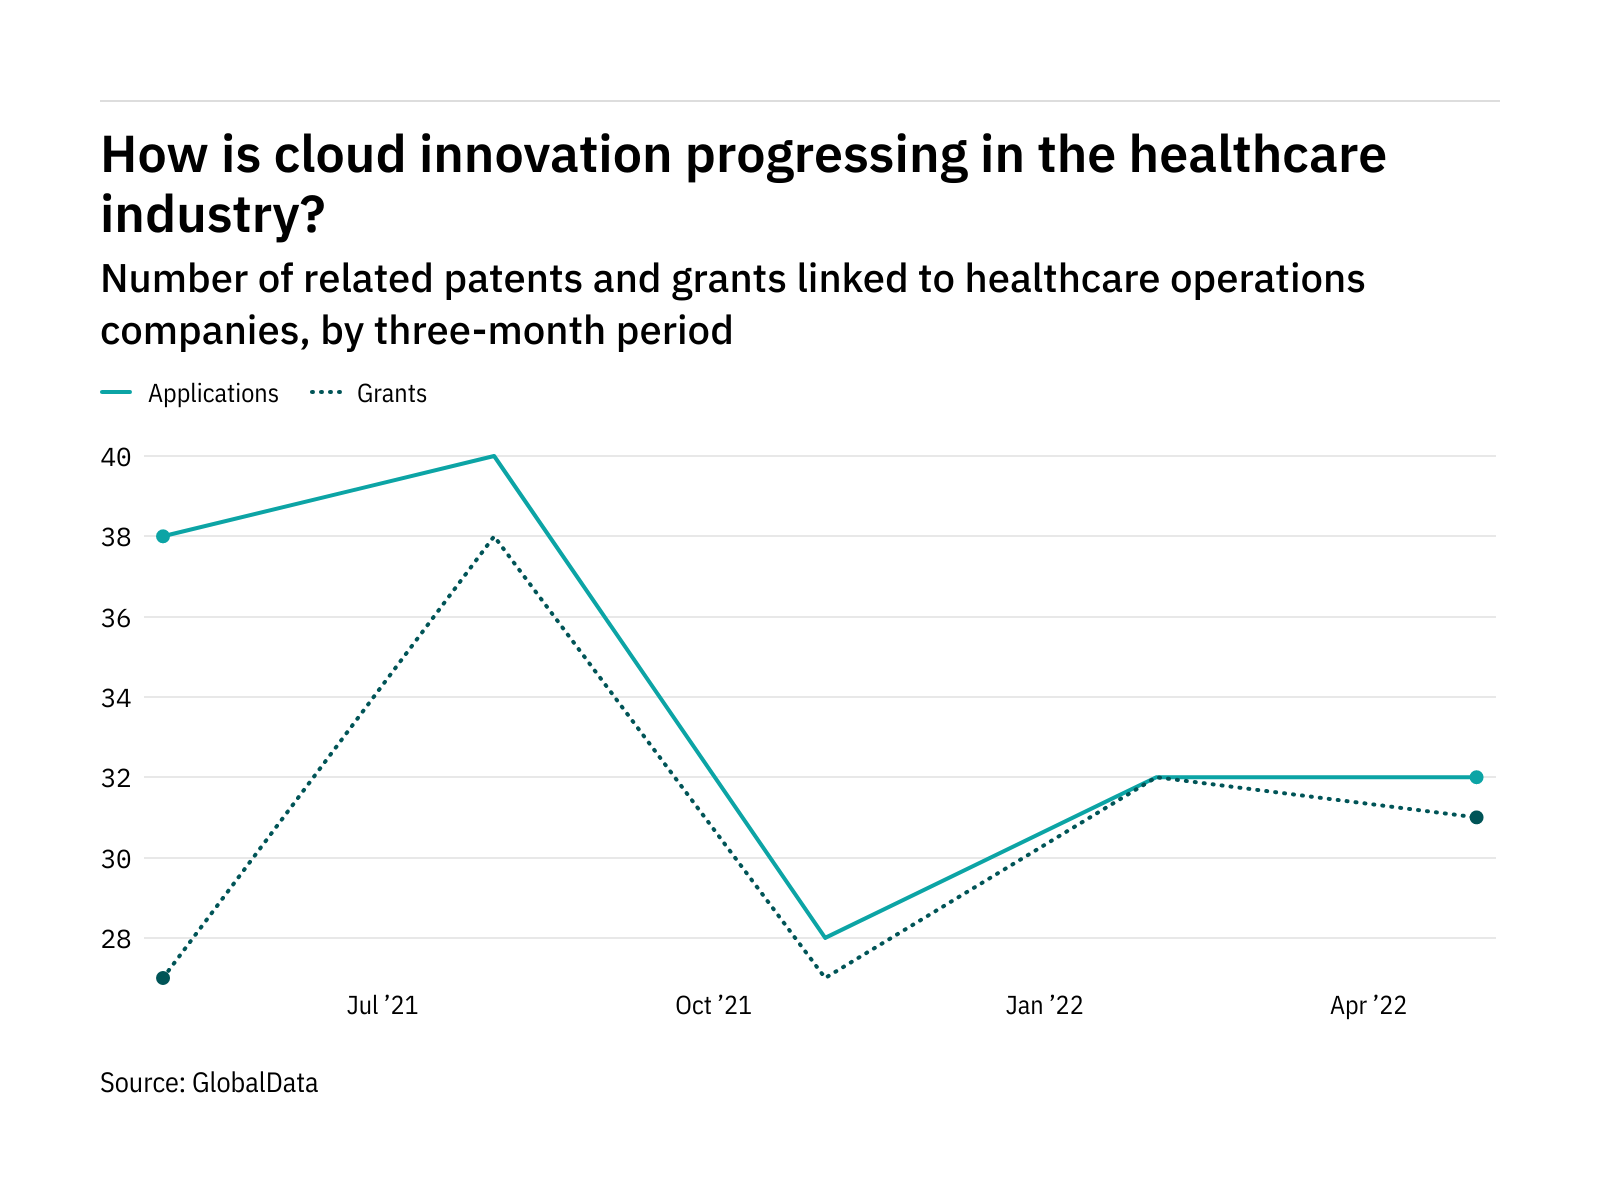 How is cloud innovation progressing in the healthcare industry?